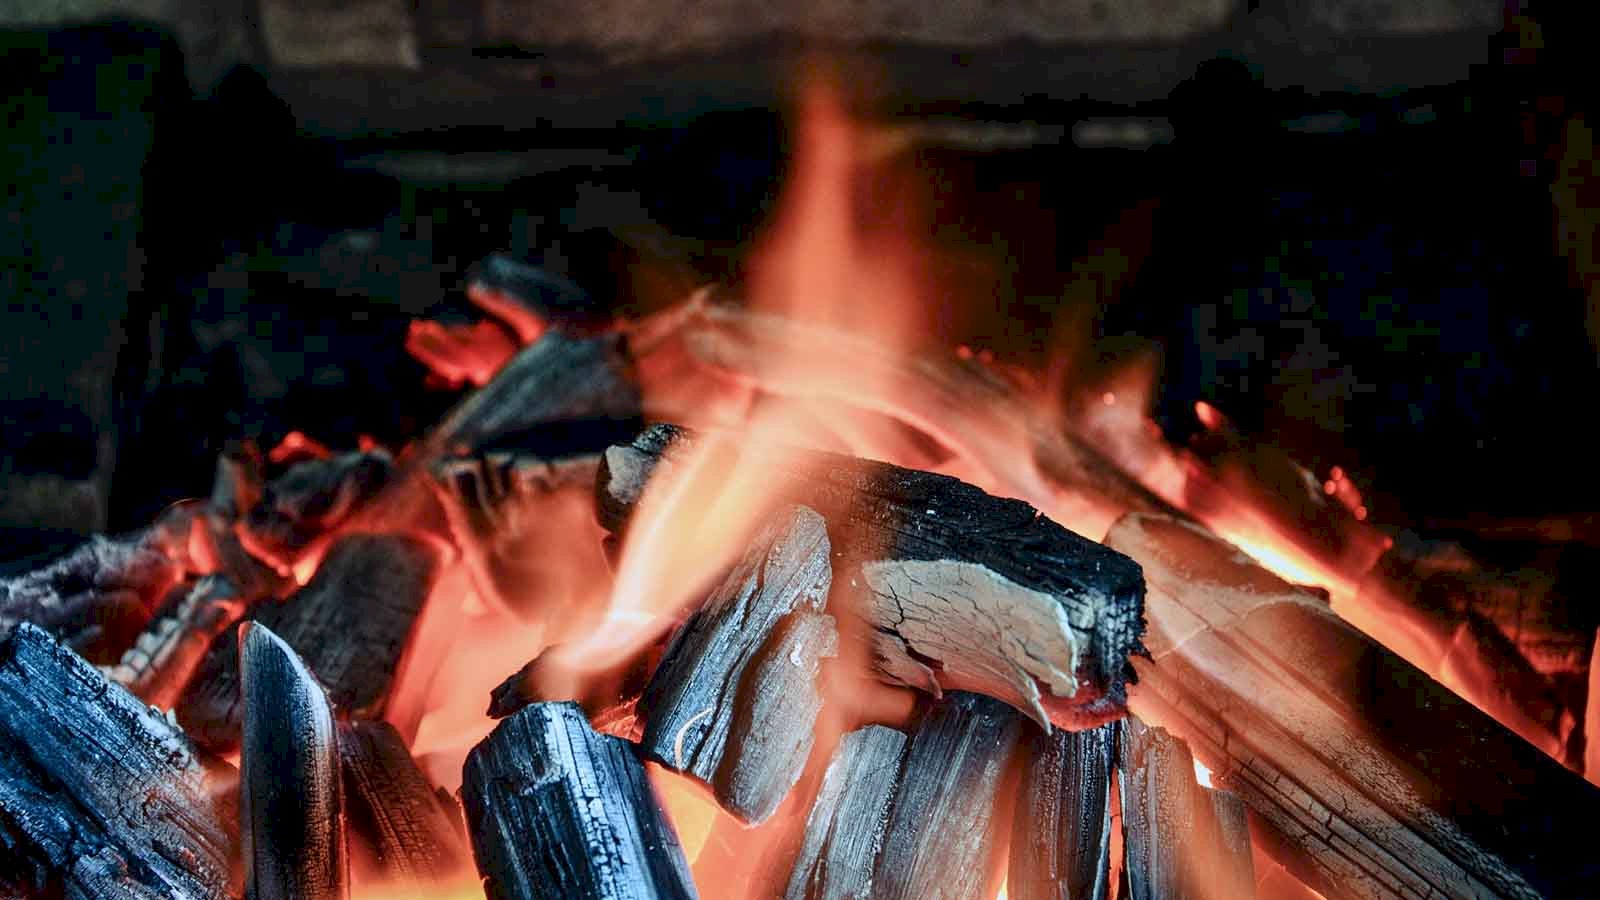 Image showing a warming log fire against a brick wall background.